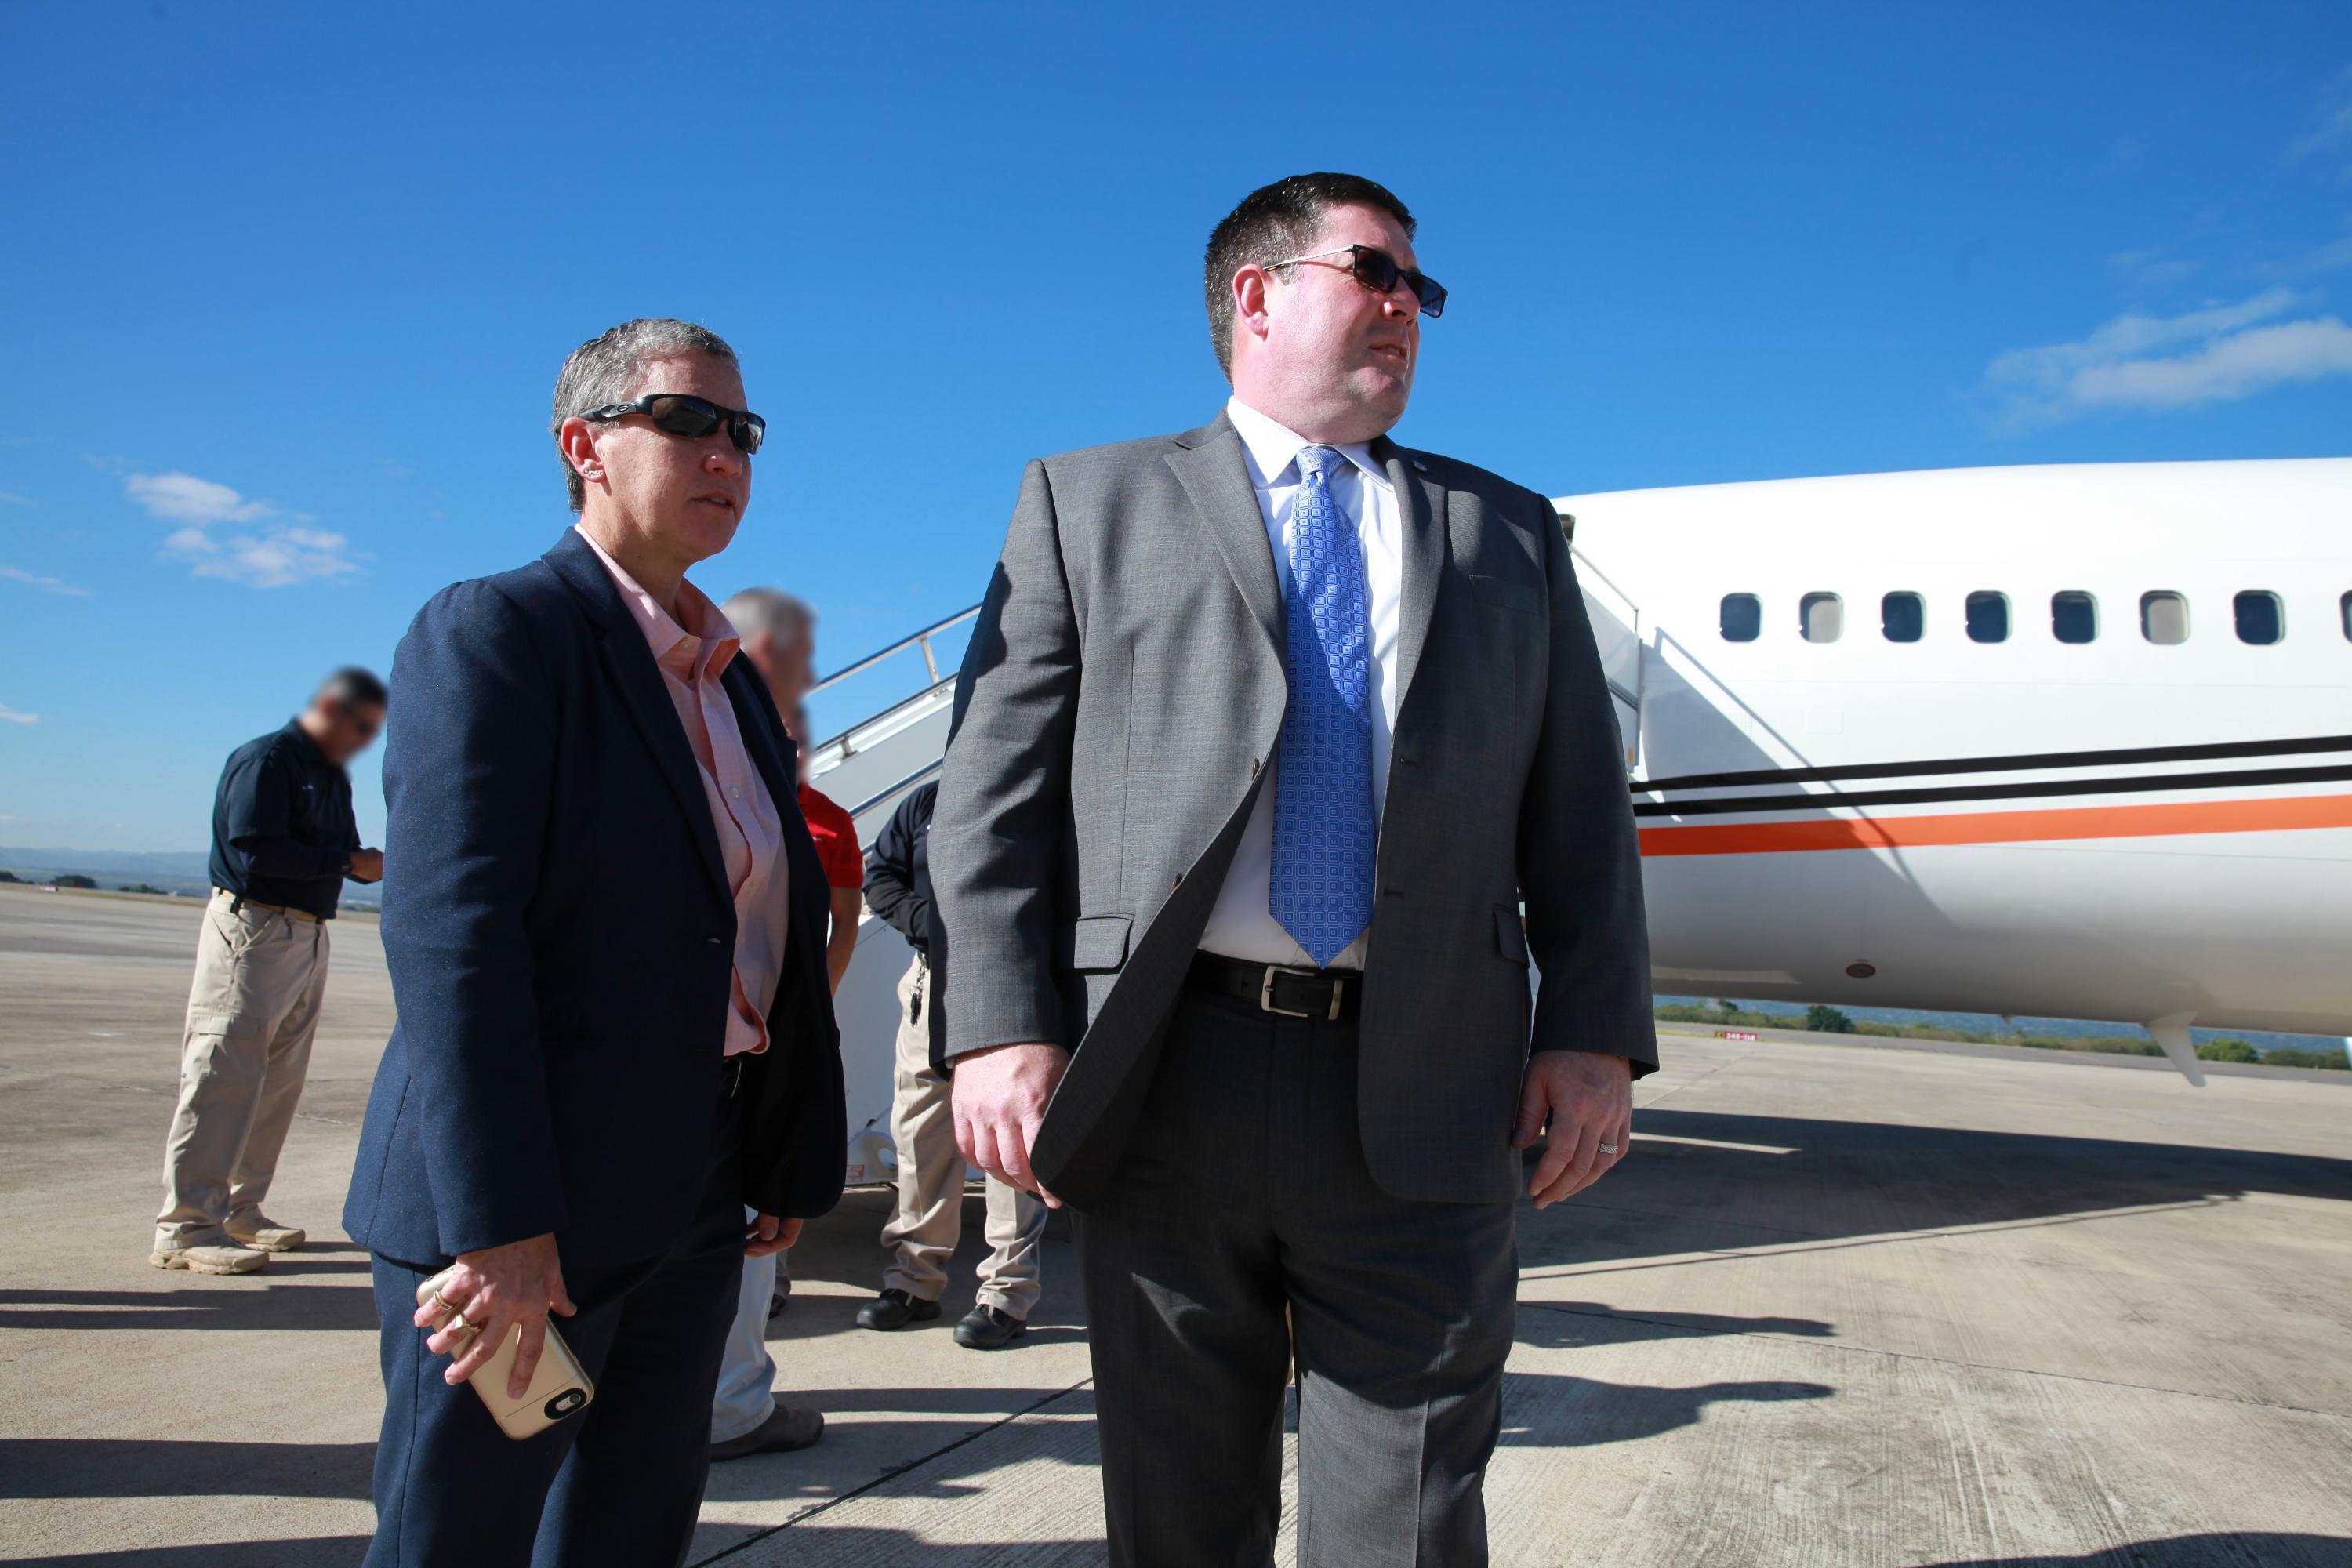 U.S. Immigration and Customs Enforcement (ICE) Enforcement and Removal Operations (ERO) Deputy Executive Associate Director Philip Miller (right) on the tarmac with an ICE removal flight in Honduras. Photo: ICE.